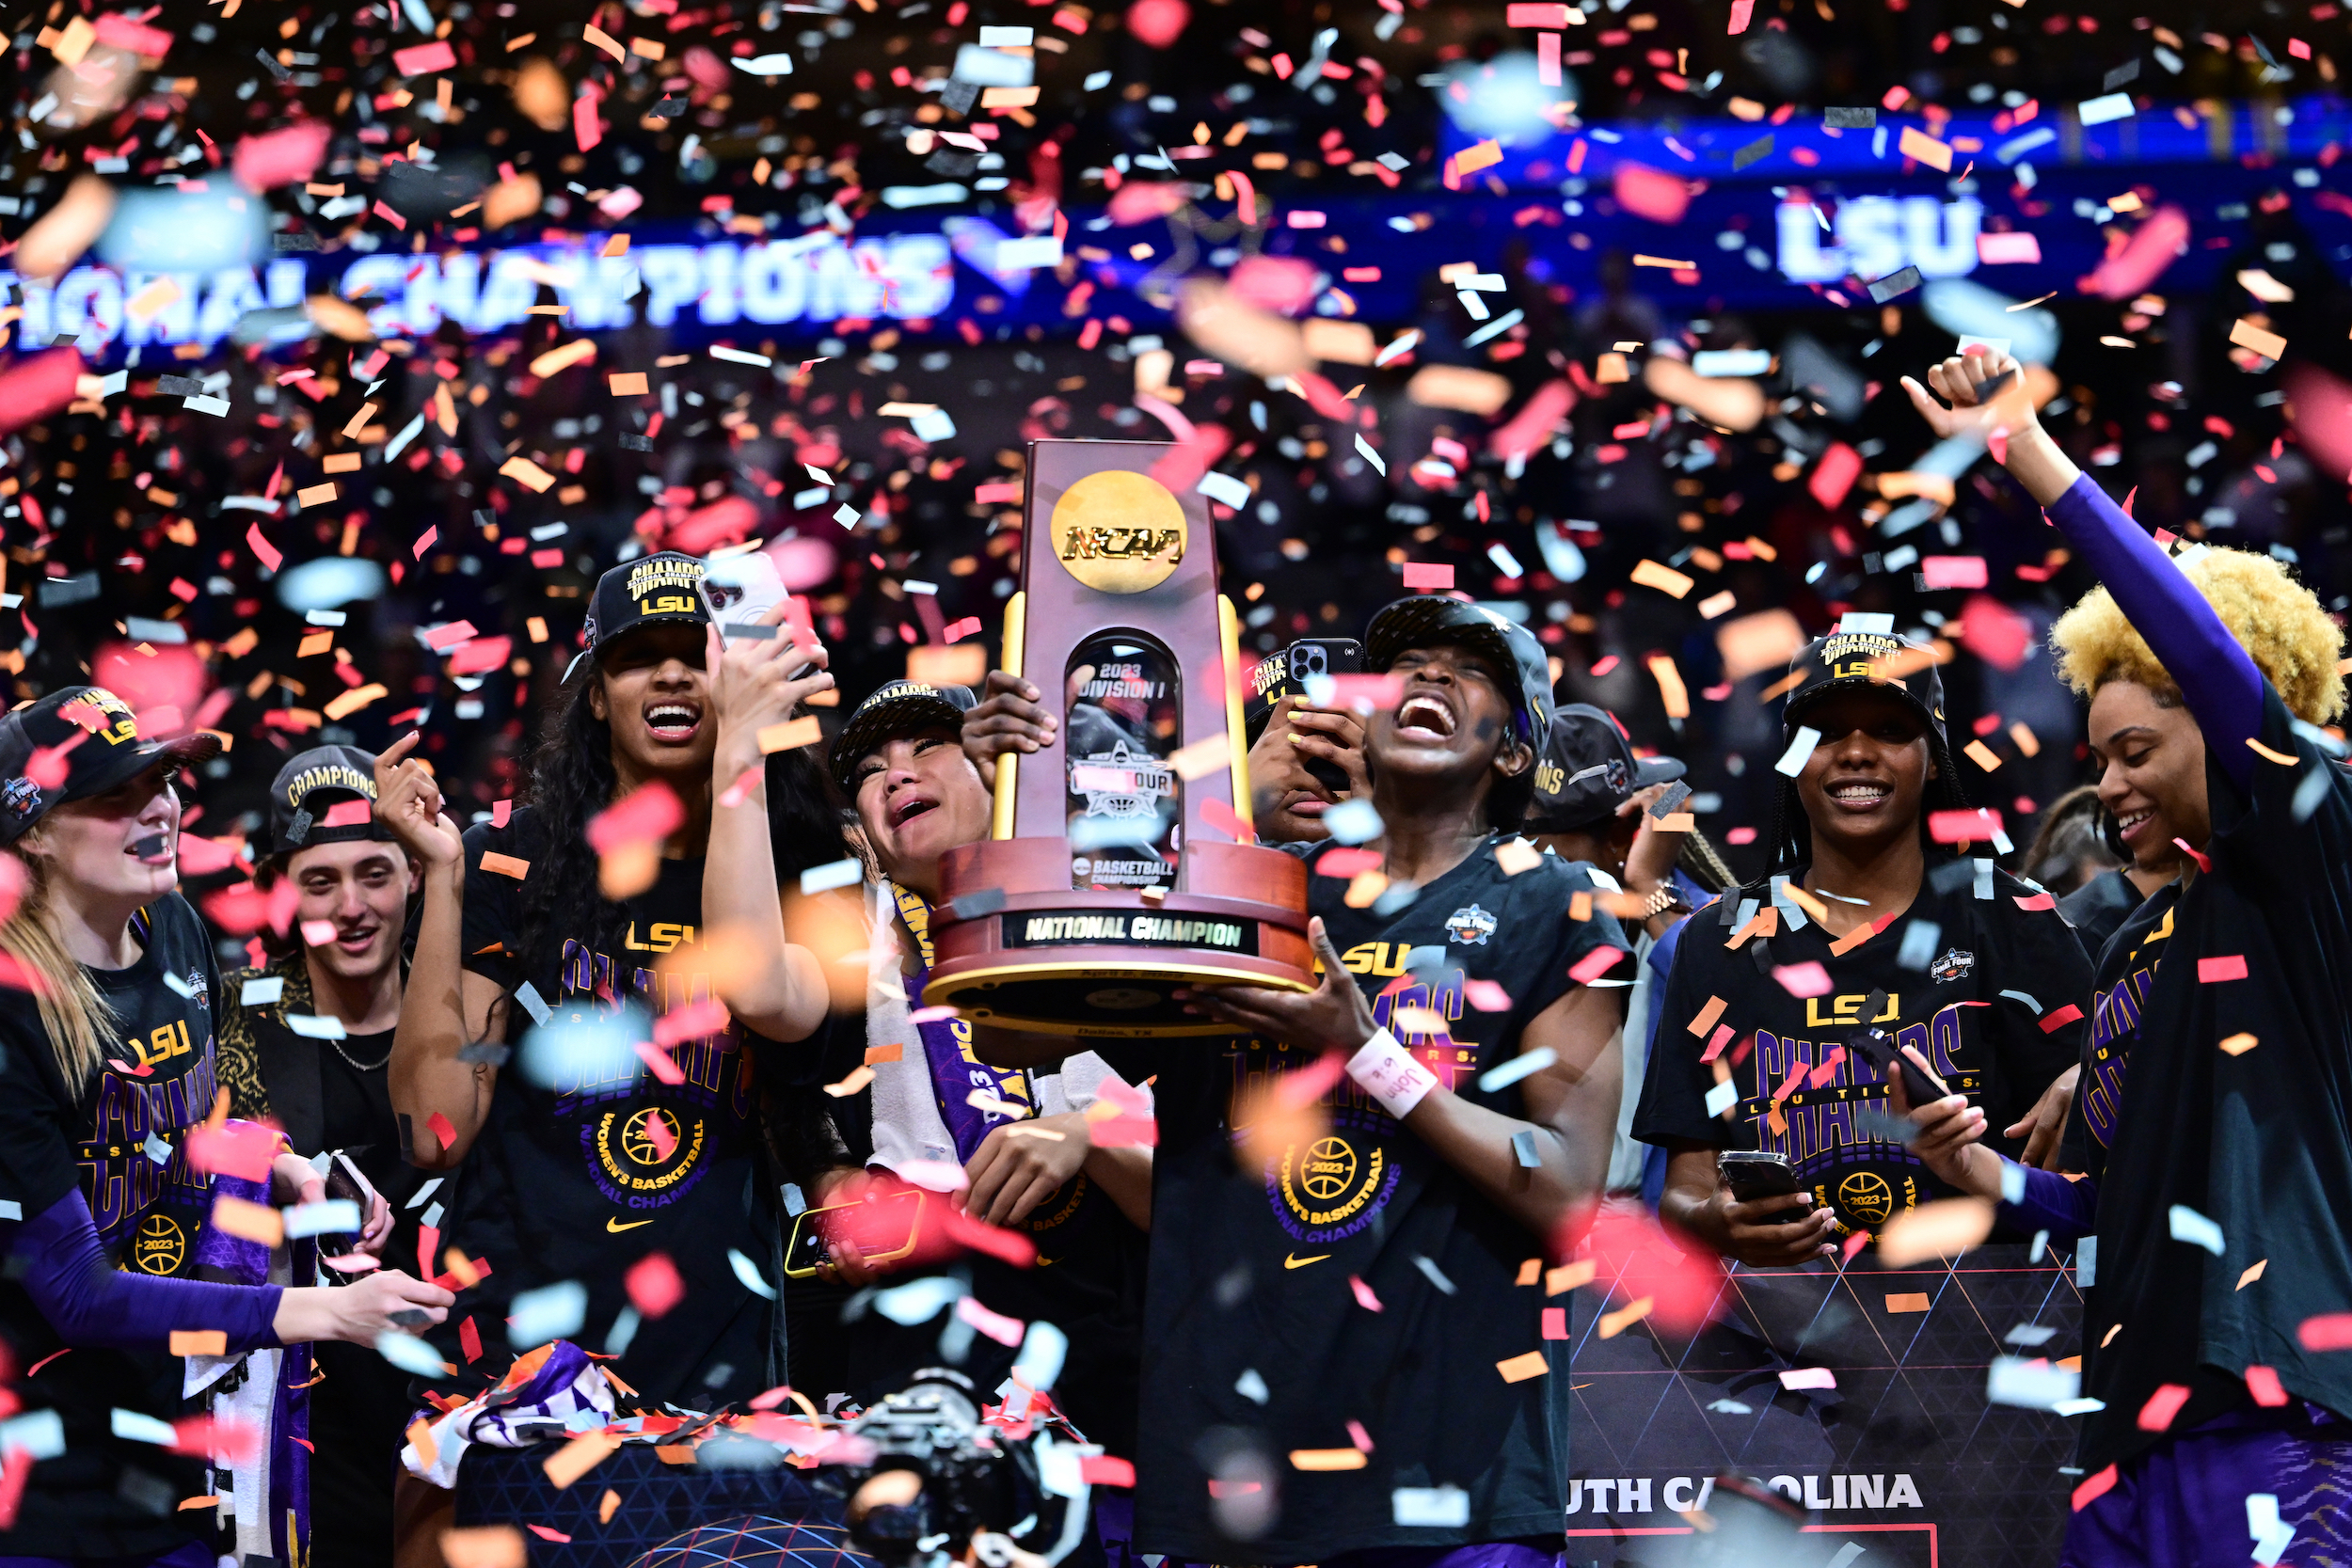 Louisiana State Tigers players celebrate their win over the Iowa Hawkeyes during the 2023 NCAA Women's Basketball Tournament National Championship at American Airlines Center on April 2, 2023 in Dallas, Texas.